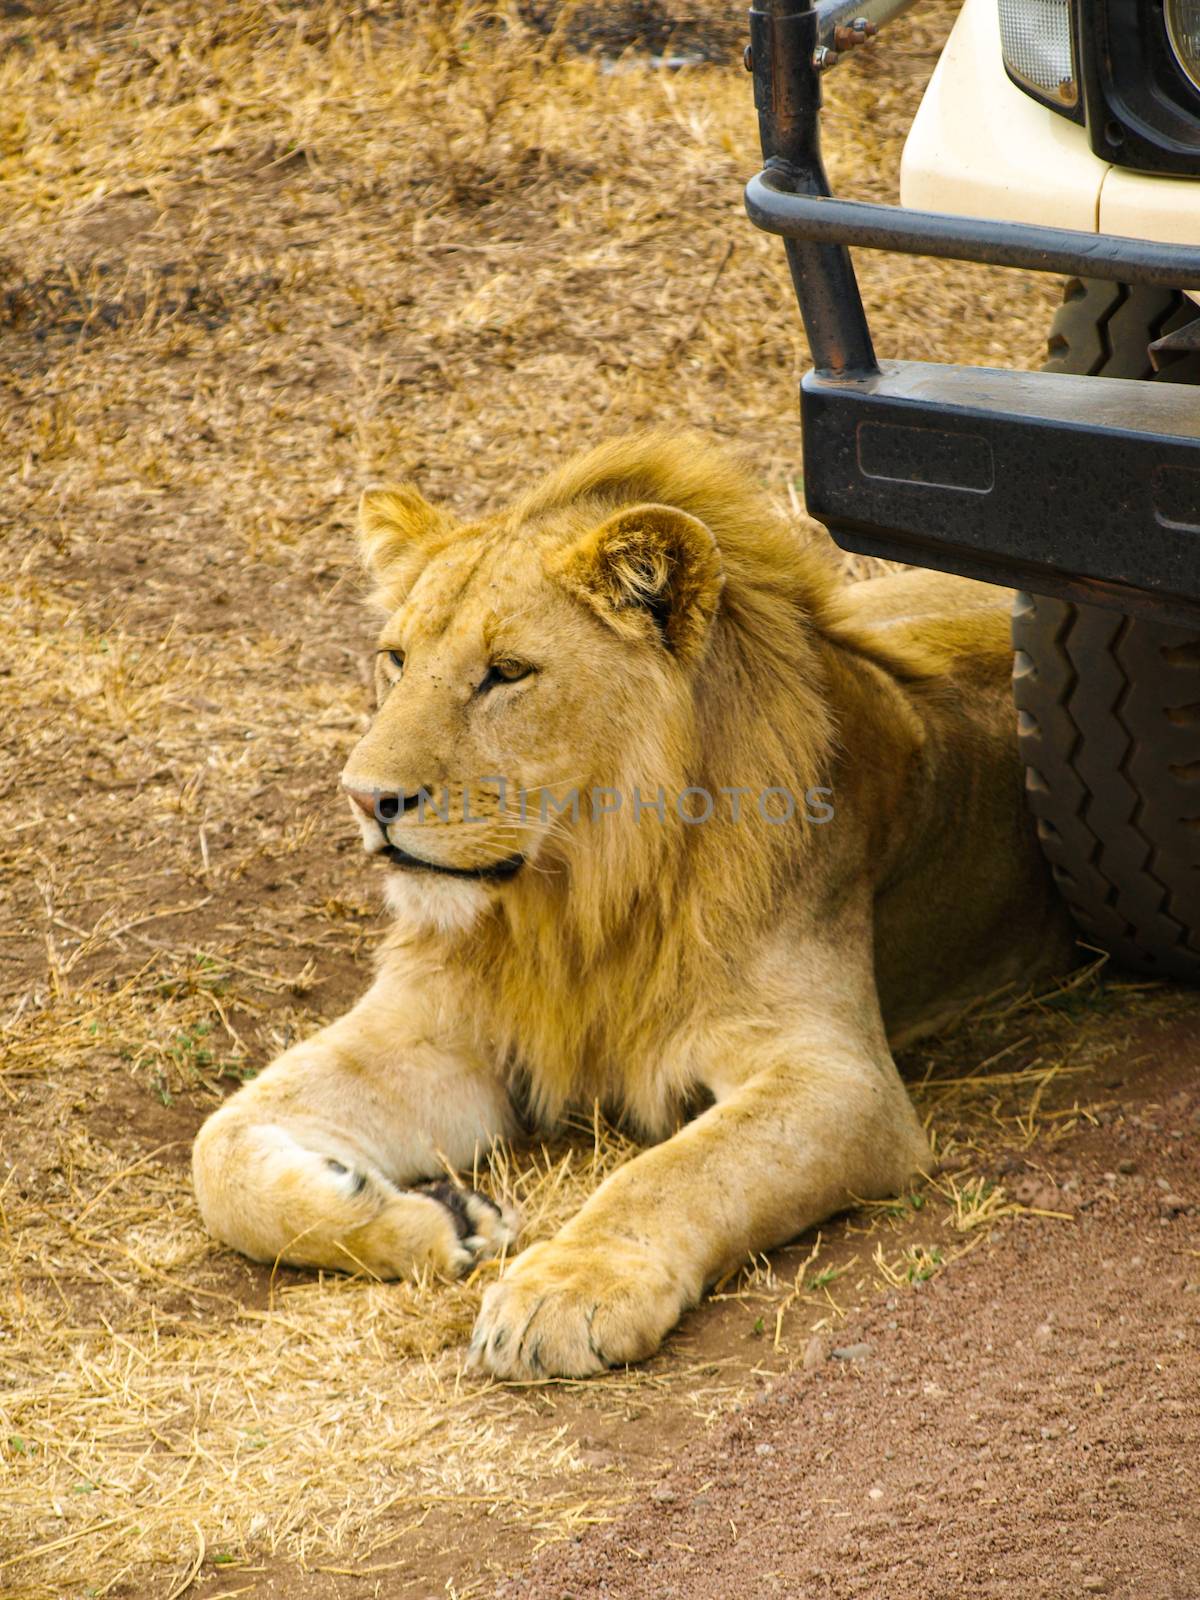 Lion at the car by pyty